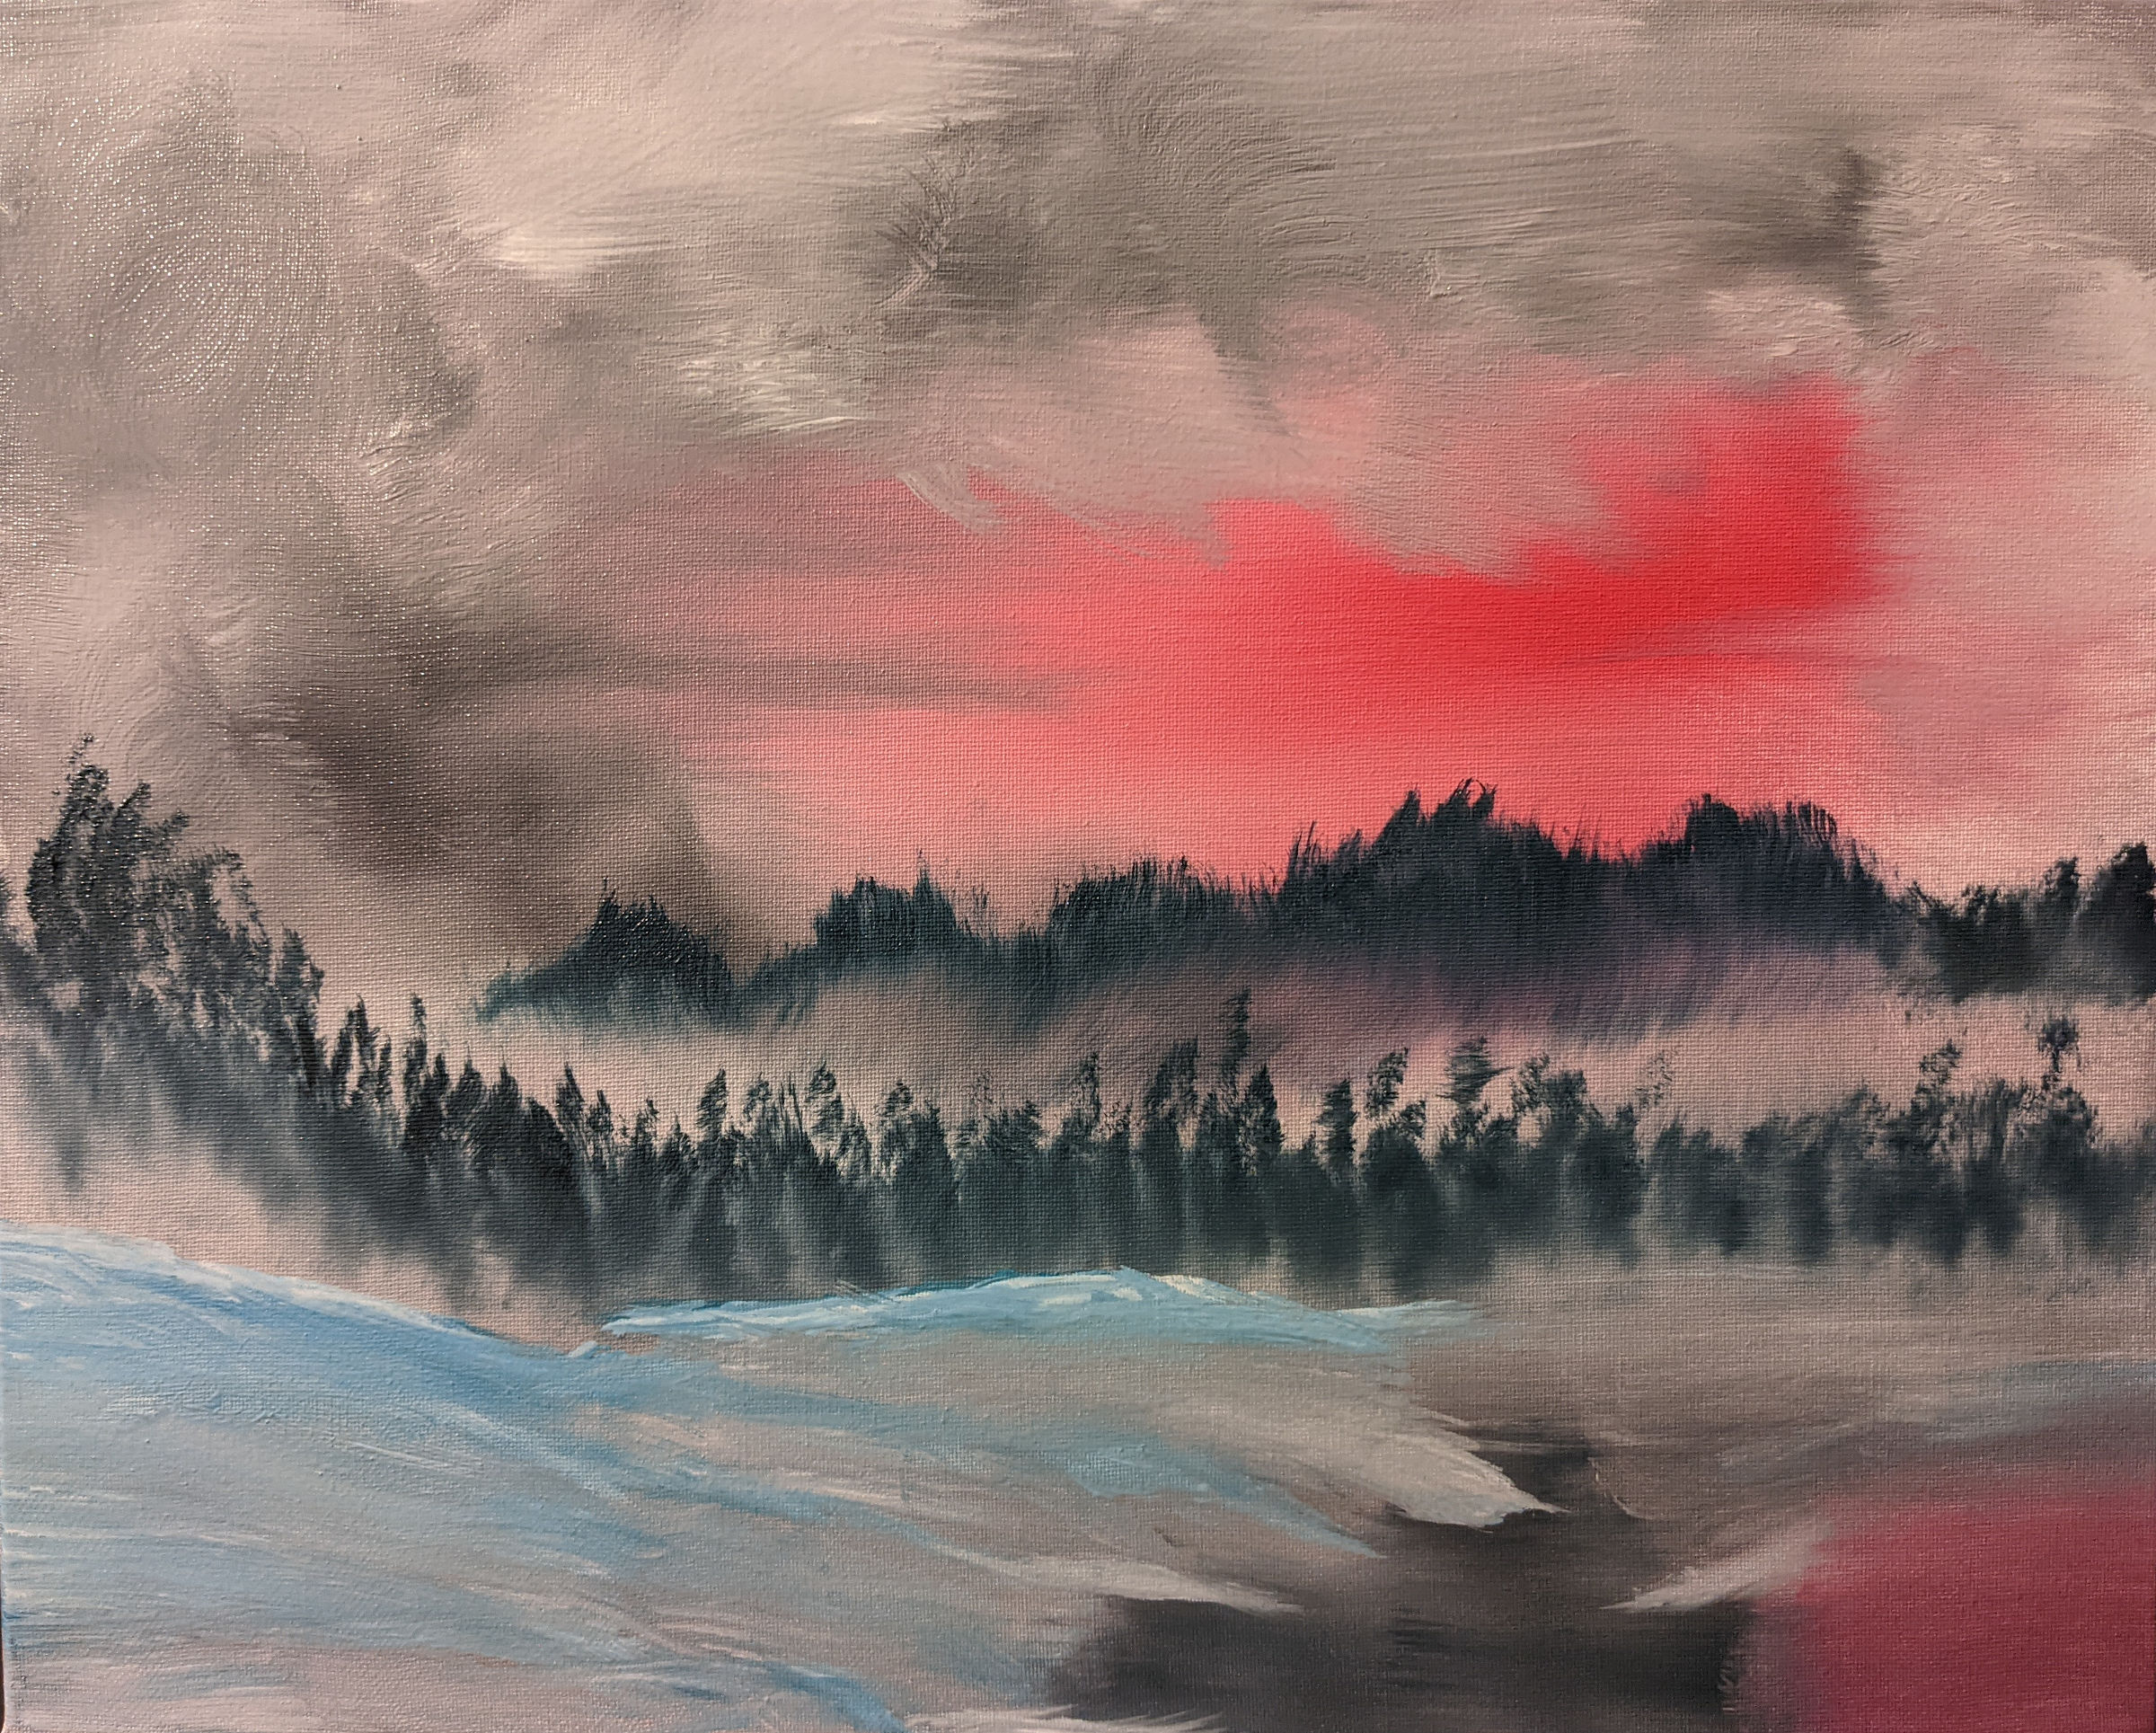 Oil painting of a frozen ground and water in the foreground. Trees and mountainous area in the background and a red and gray stormy sky.